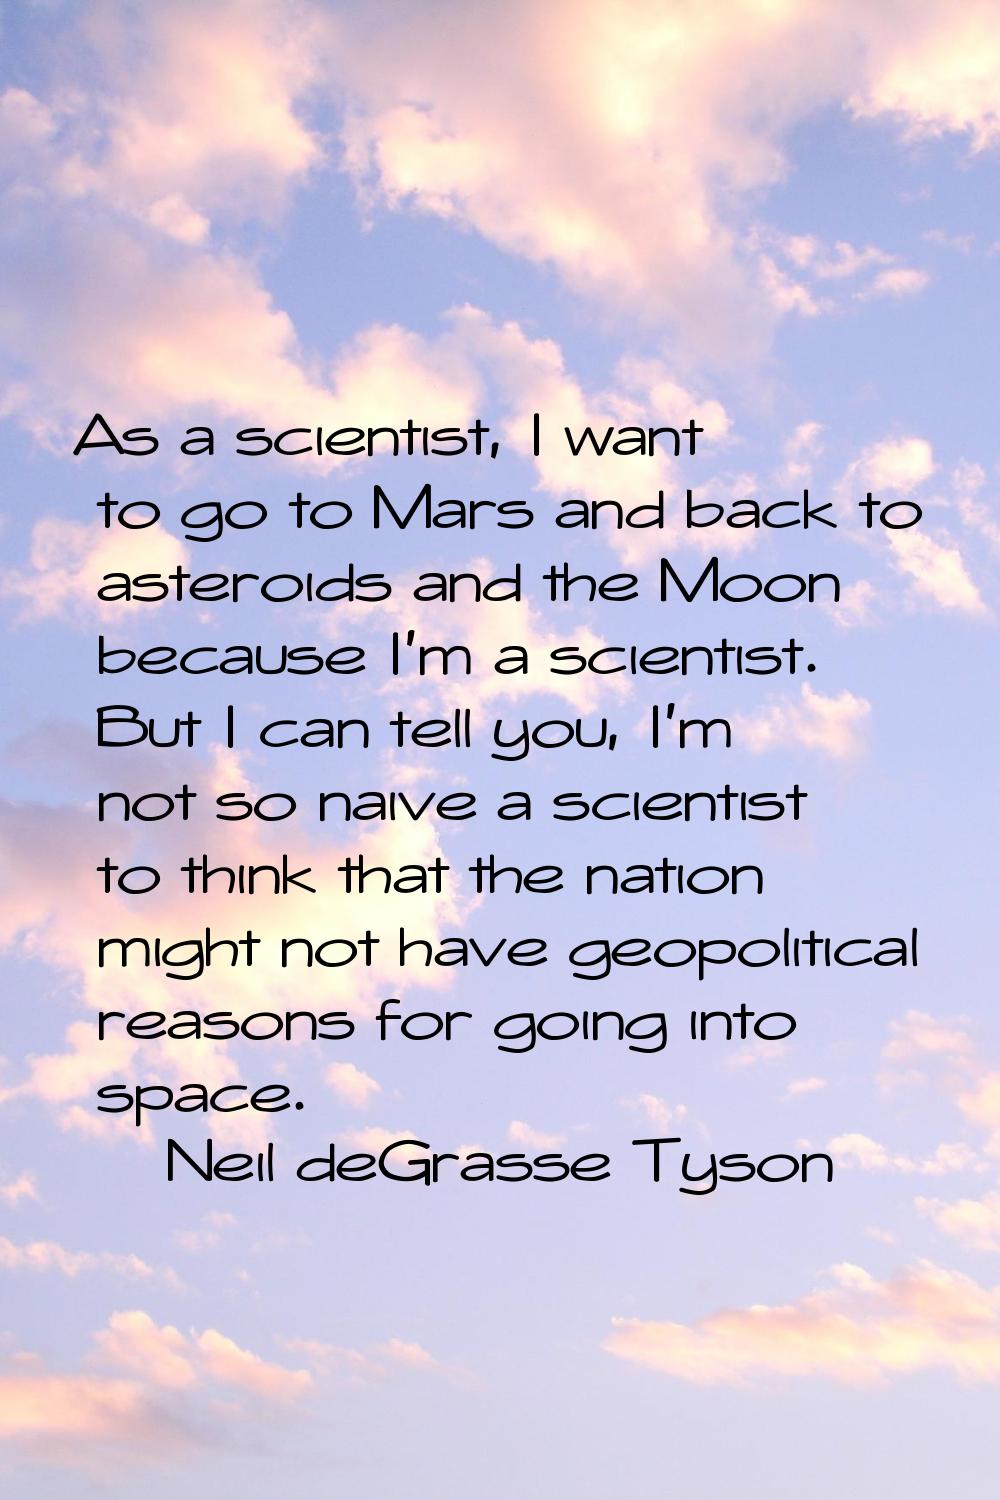 As a scientist, I want to go to Mars and back to asteroids and the Moon because I'm a scientist. Bu